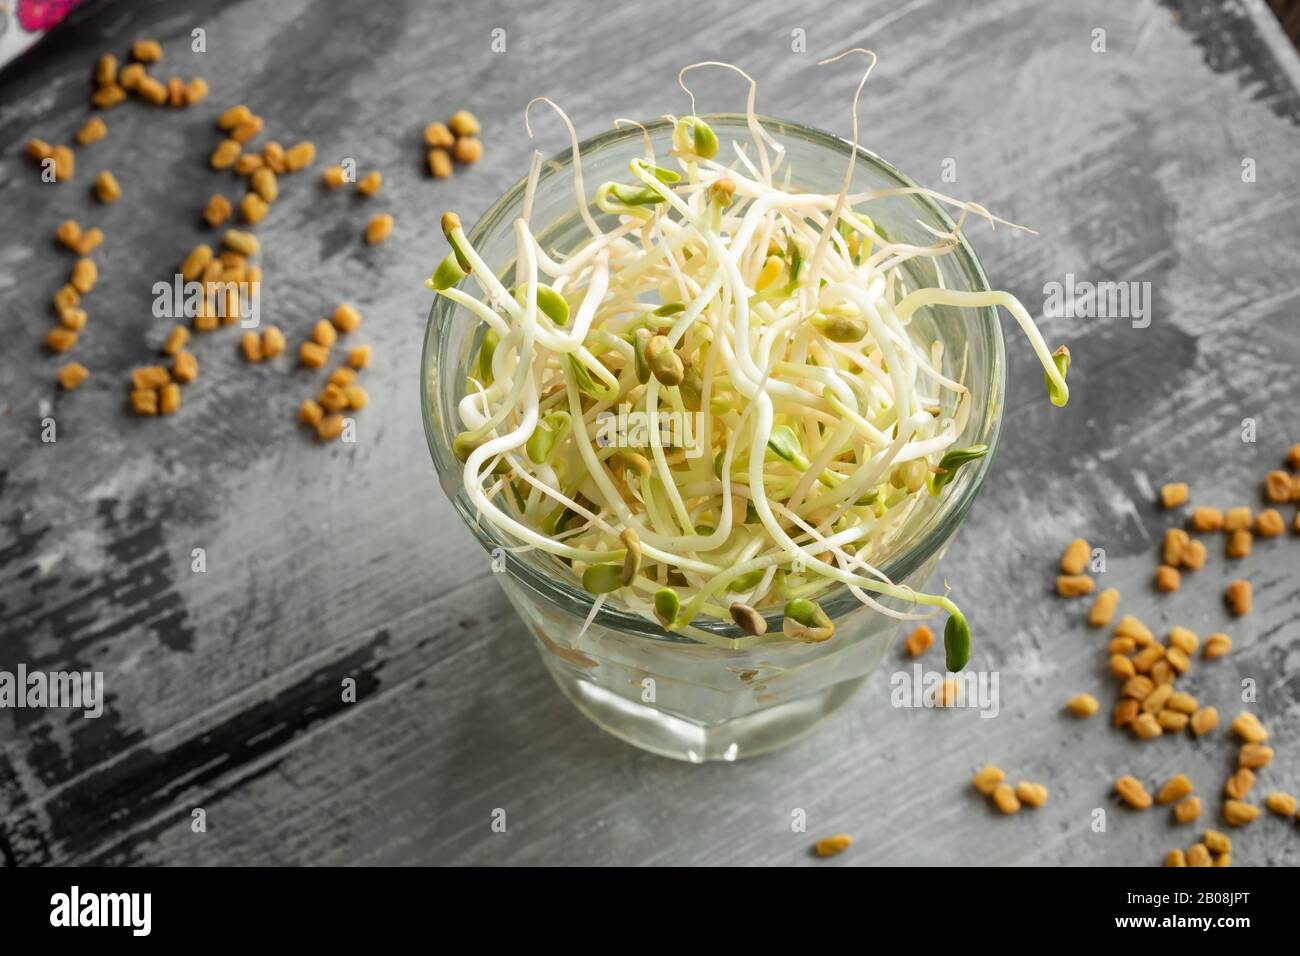 Fresh fenugreek sprouts in a glass, with dry seeds in the background Stock Photo